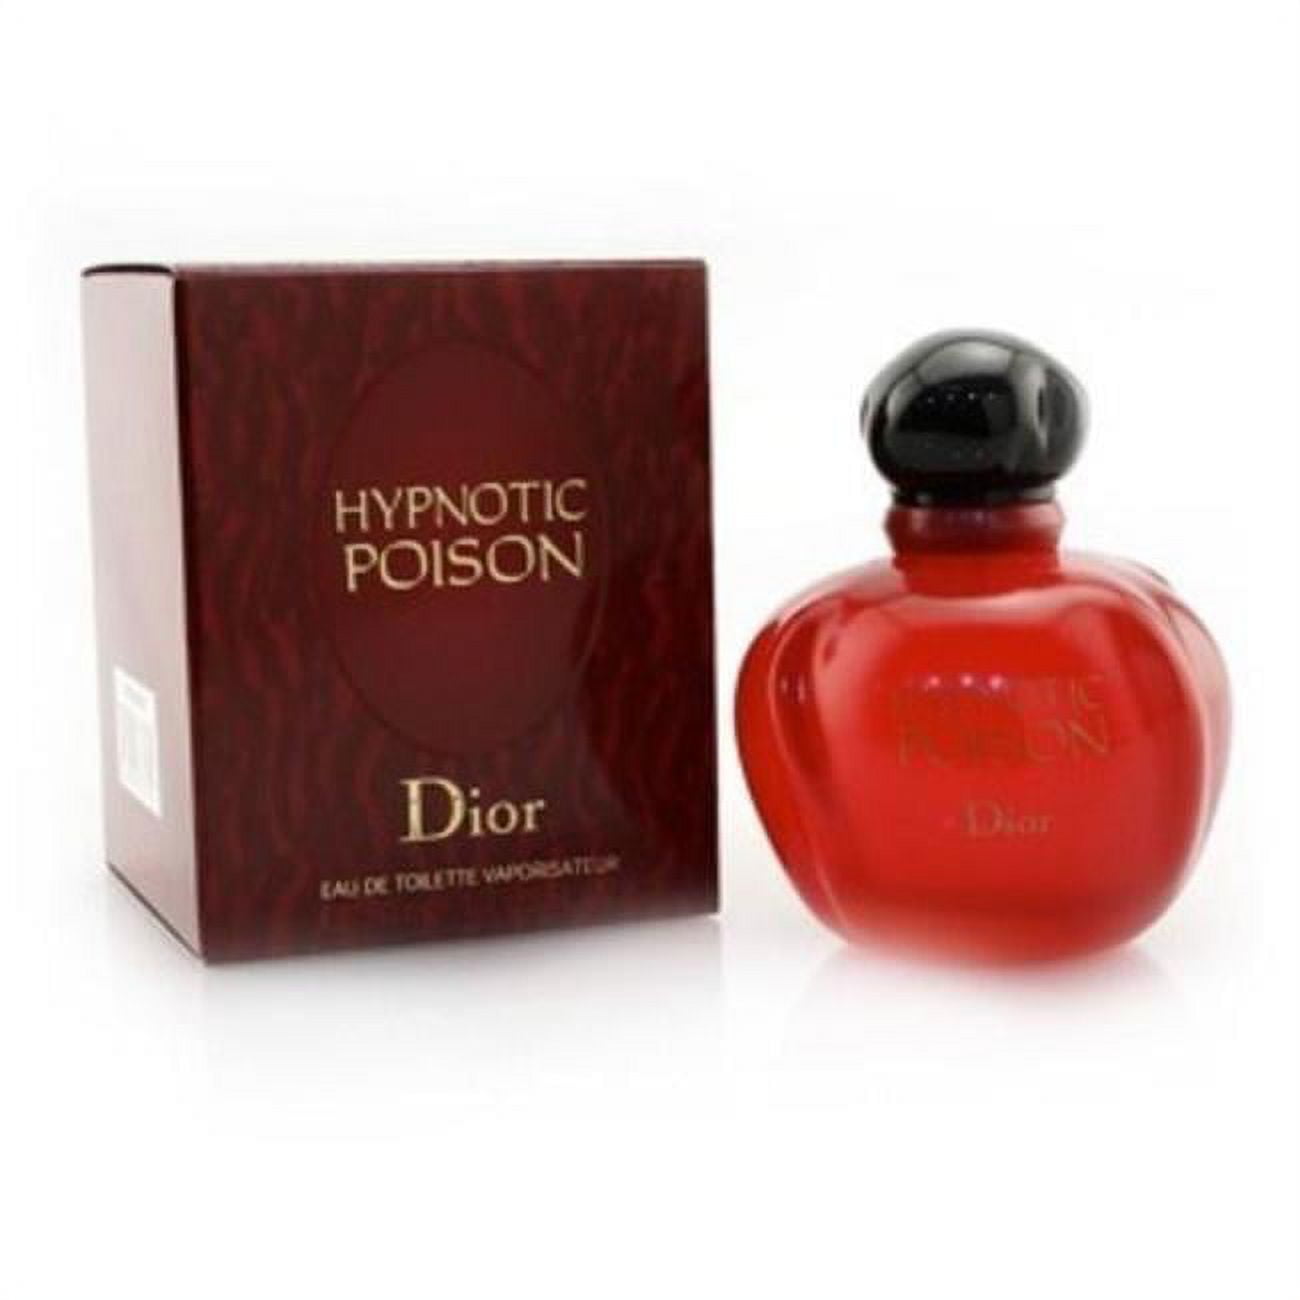 Give Poison Eau de Toilette Spray for Her - Holiday Gift Idea